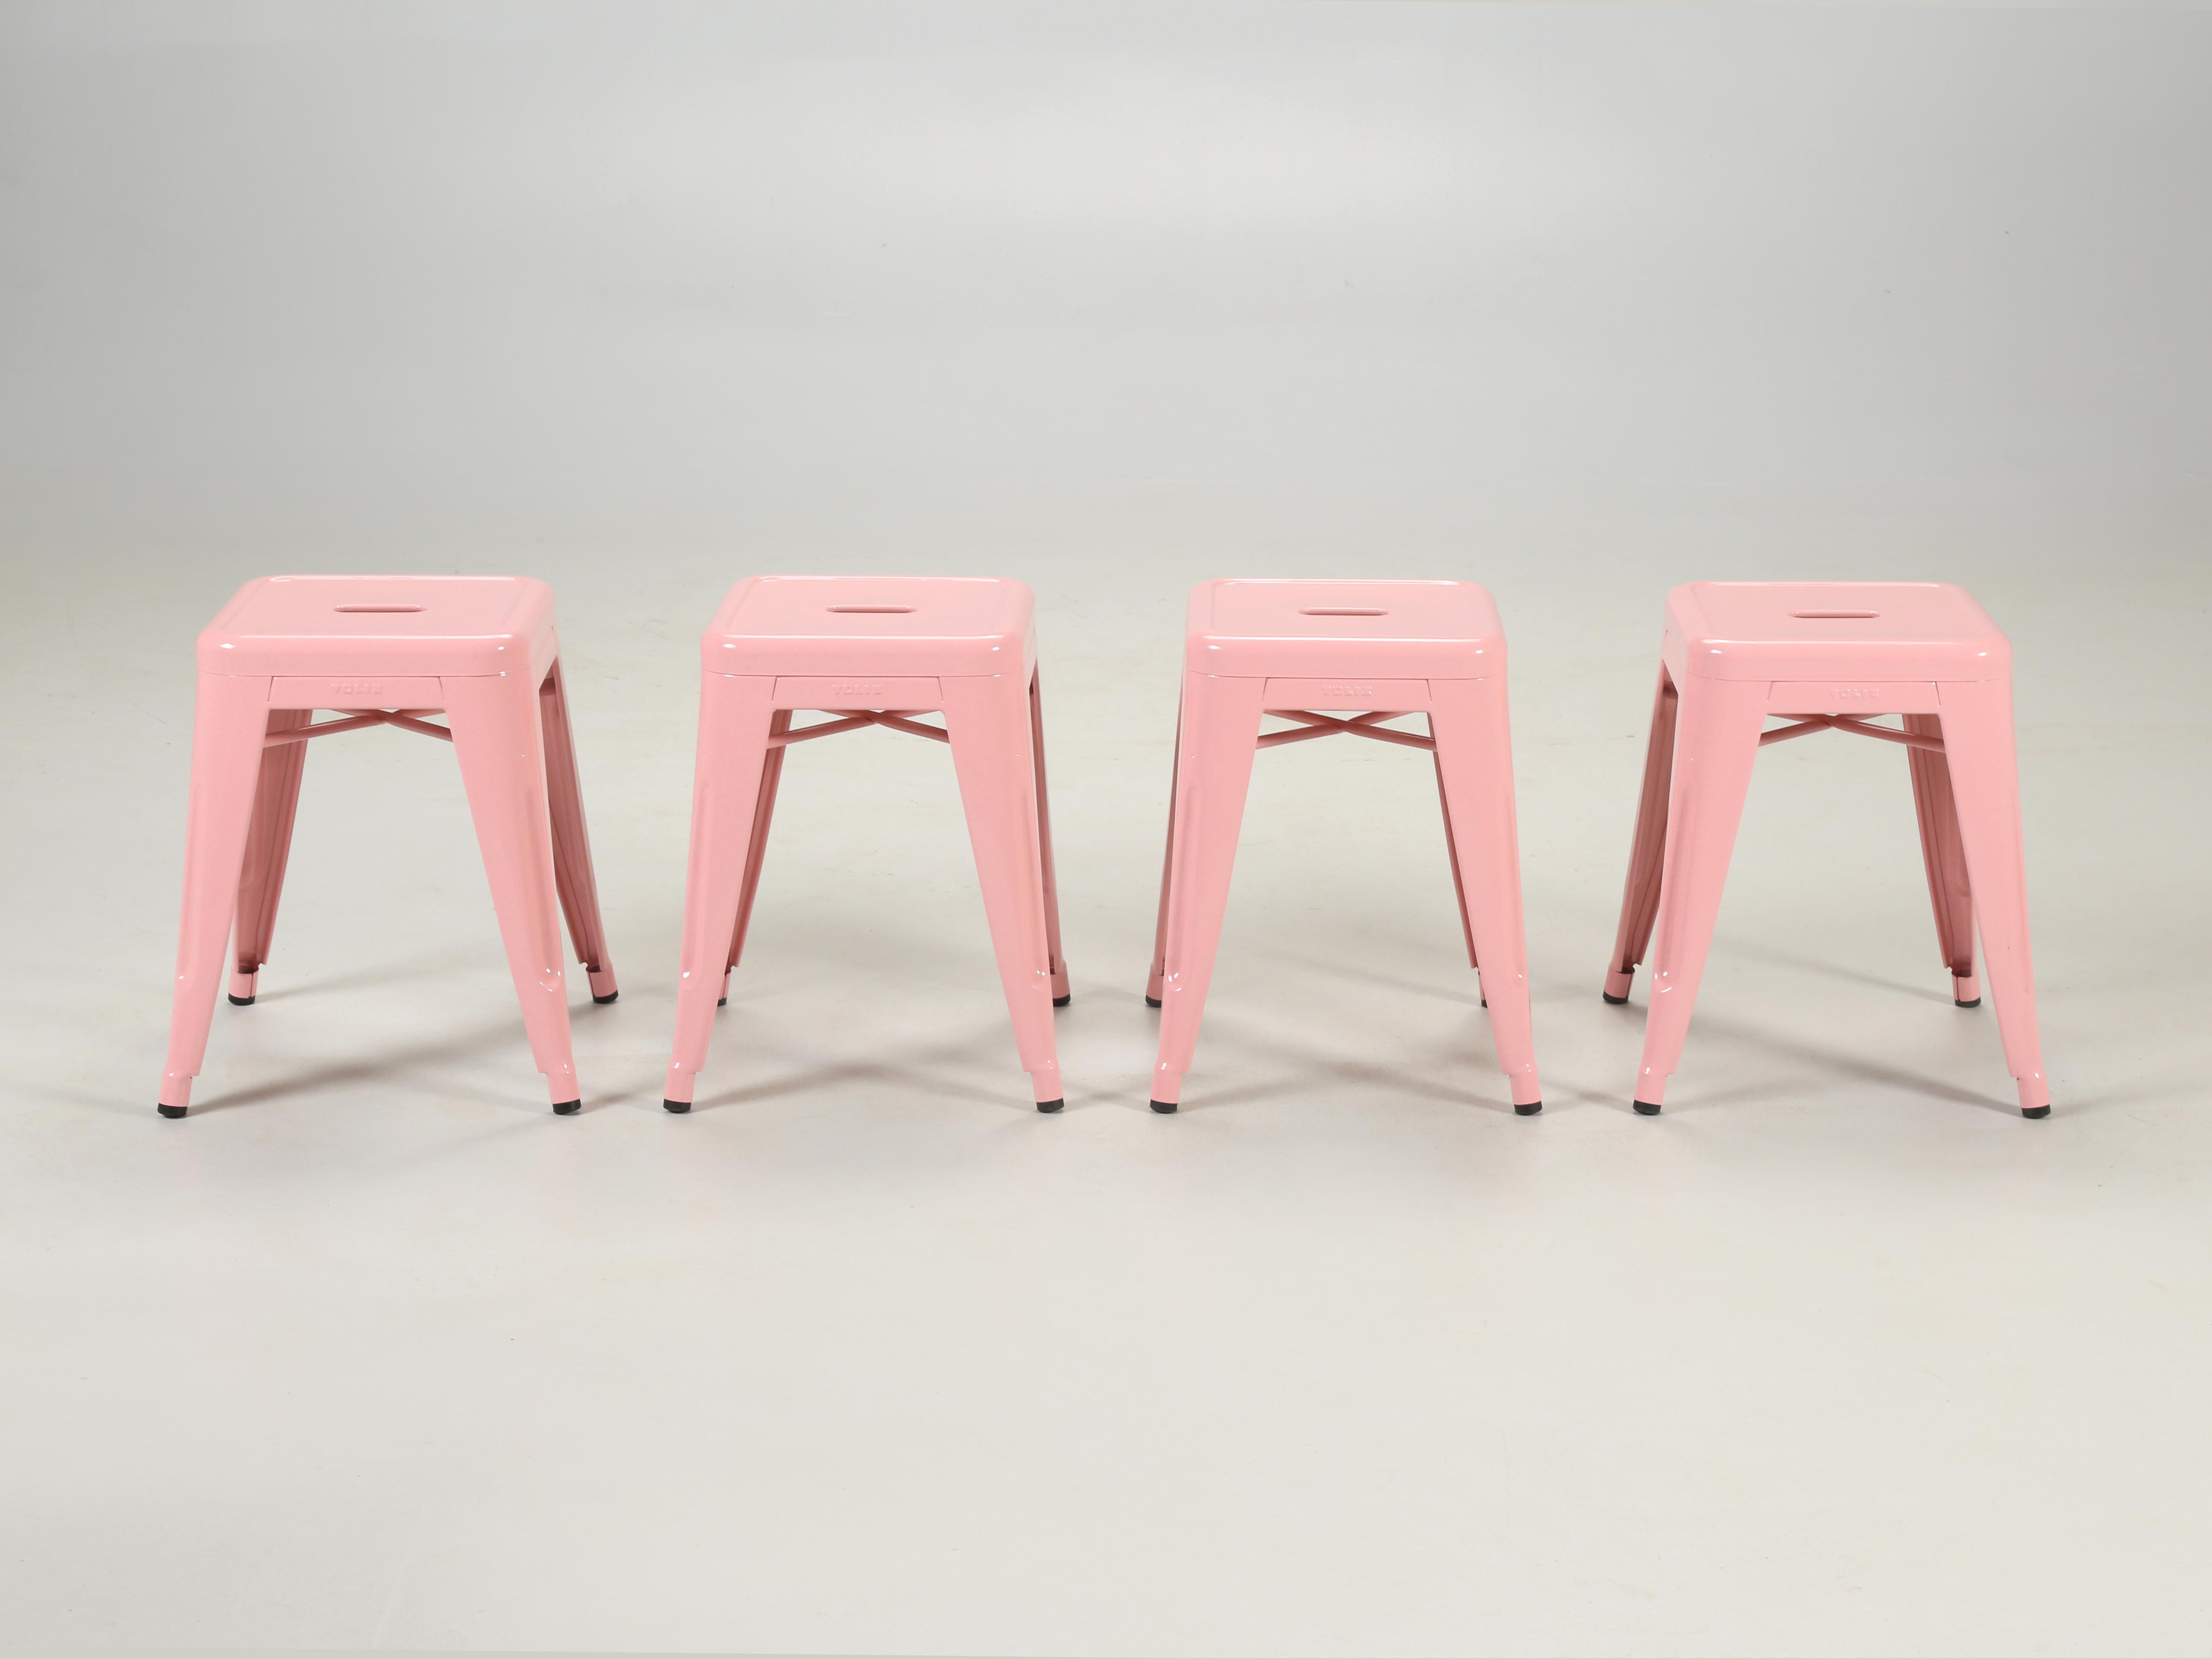 “Real” hand-made in France, authentic Tolix steel stacking stools in Pale Pink. We have amassed a collection of over (1500) pieces of genuine Tolix steel stacking stools (available in [3] different heights), Tolix steel stacking chairs and